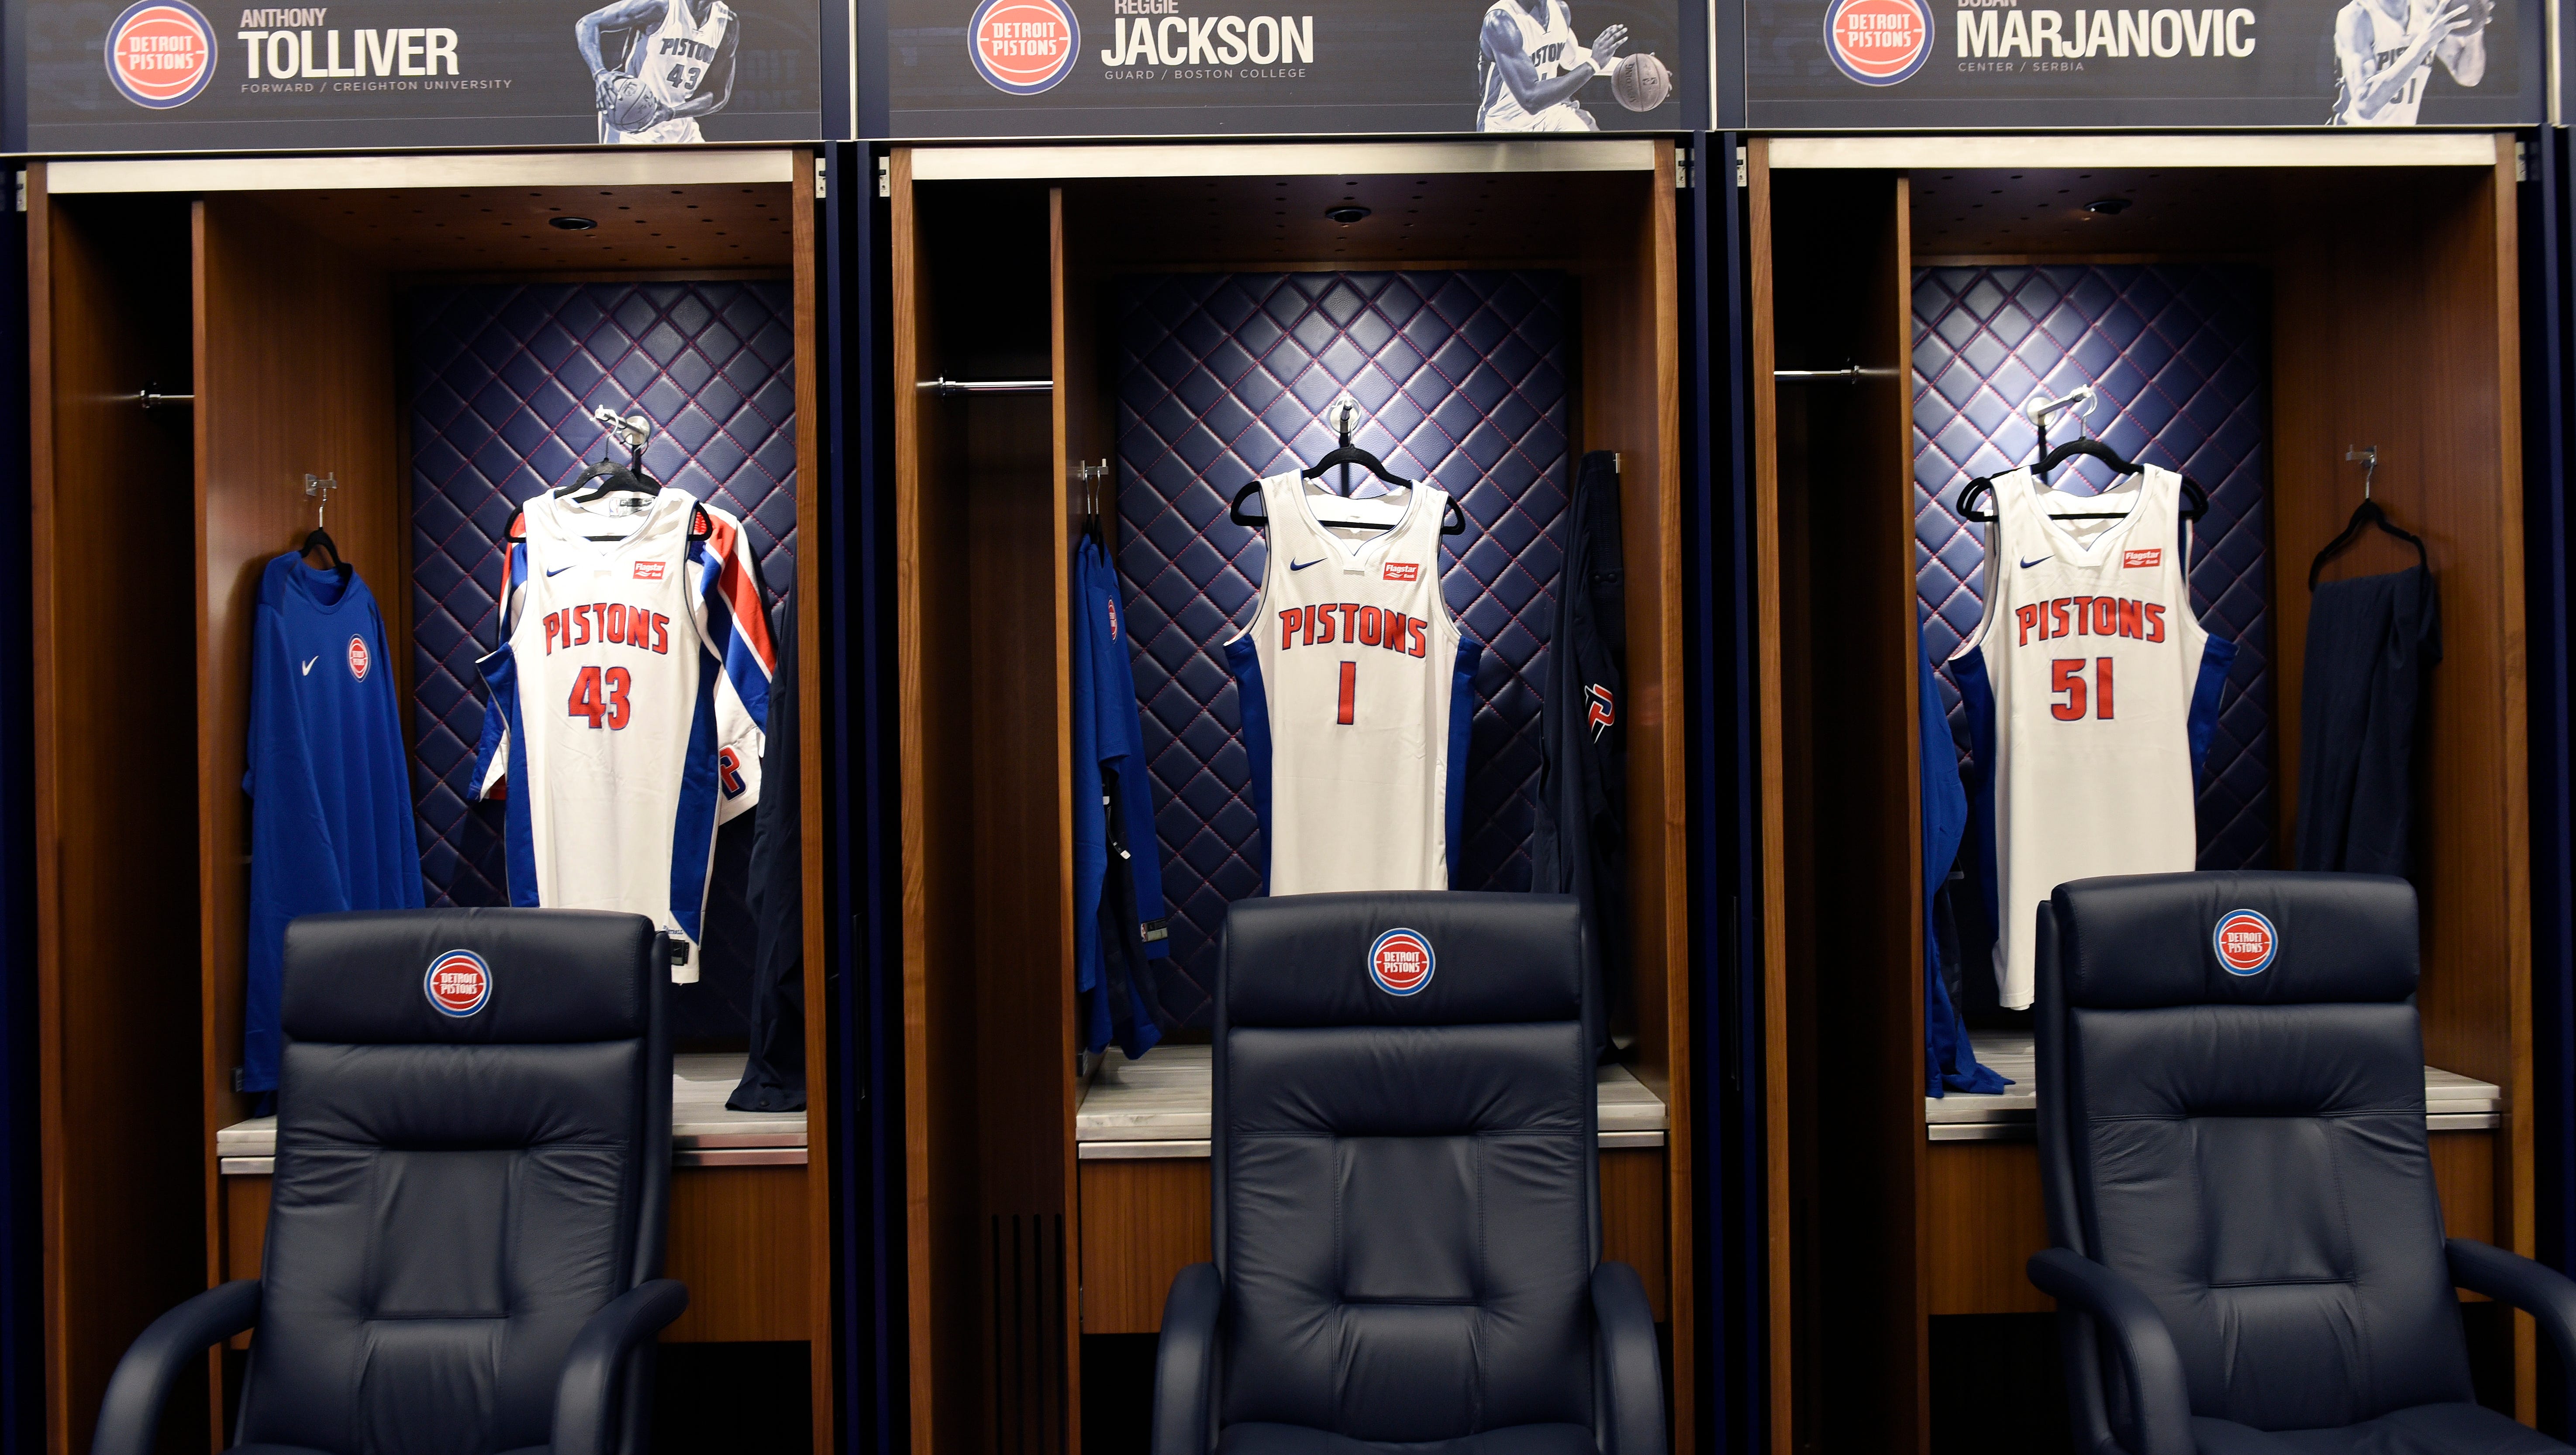 The Pistons get large, comfortable chairs in their locker room, along with three big-screen TVs.